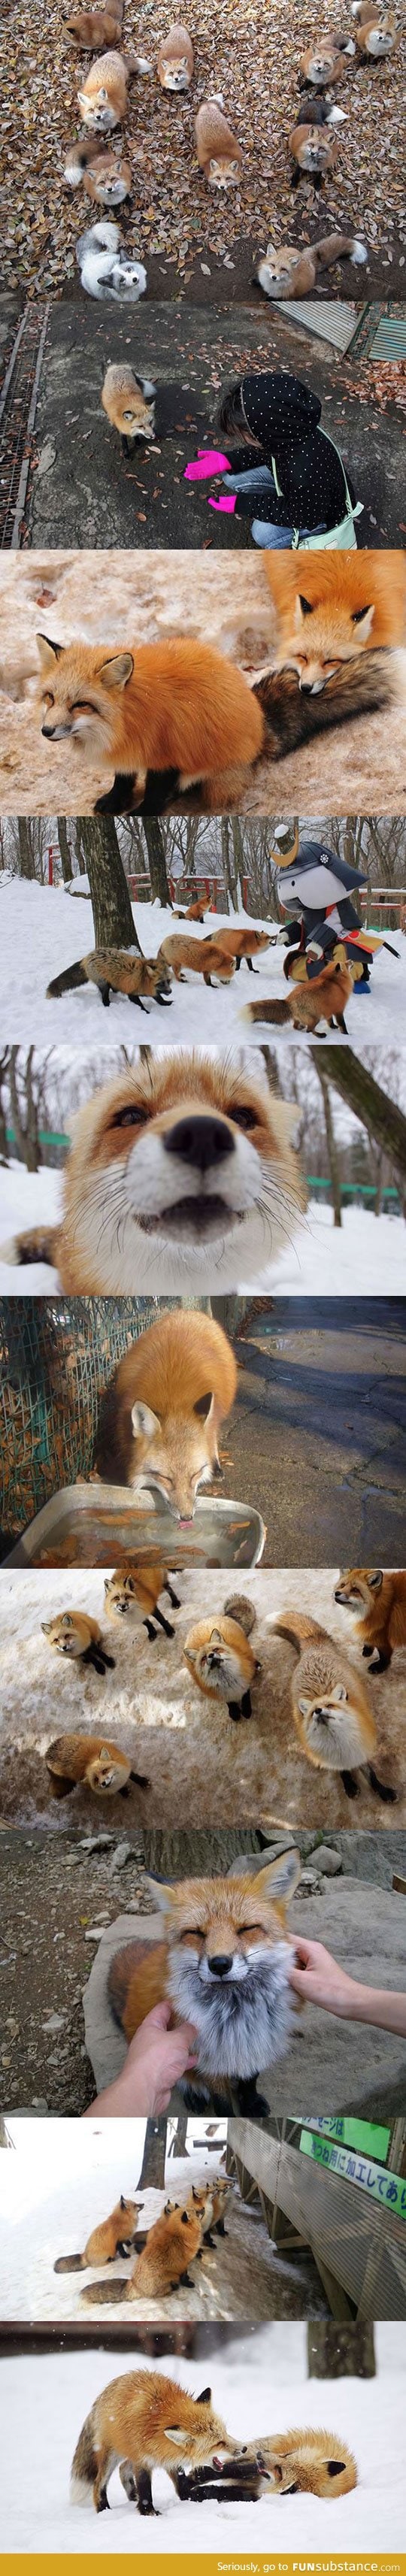 Island of foxes in Japan